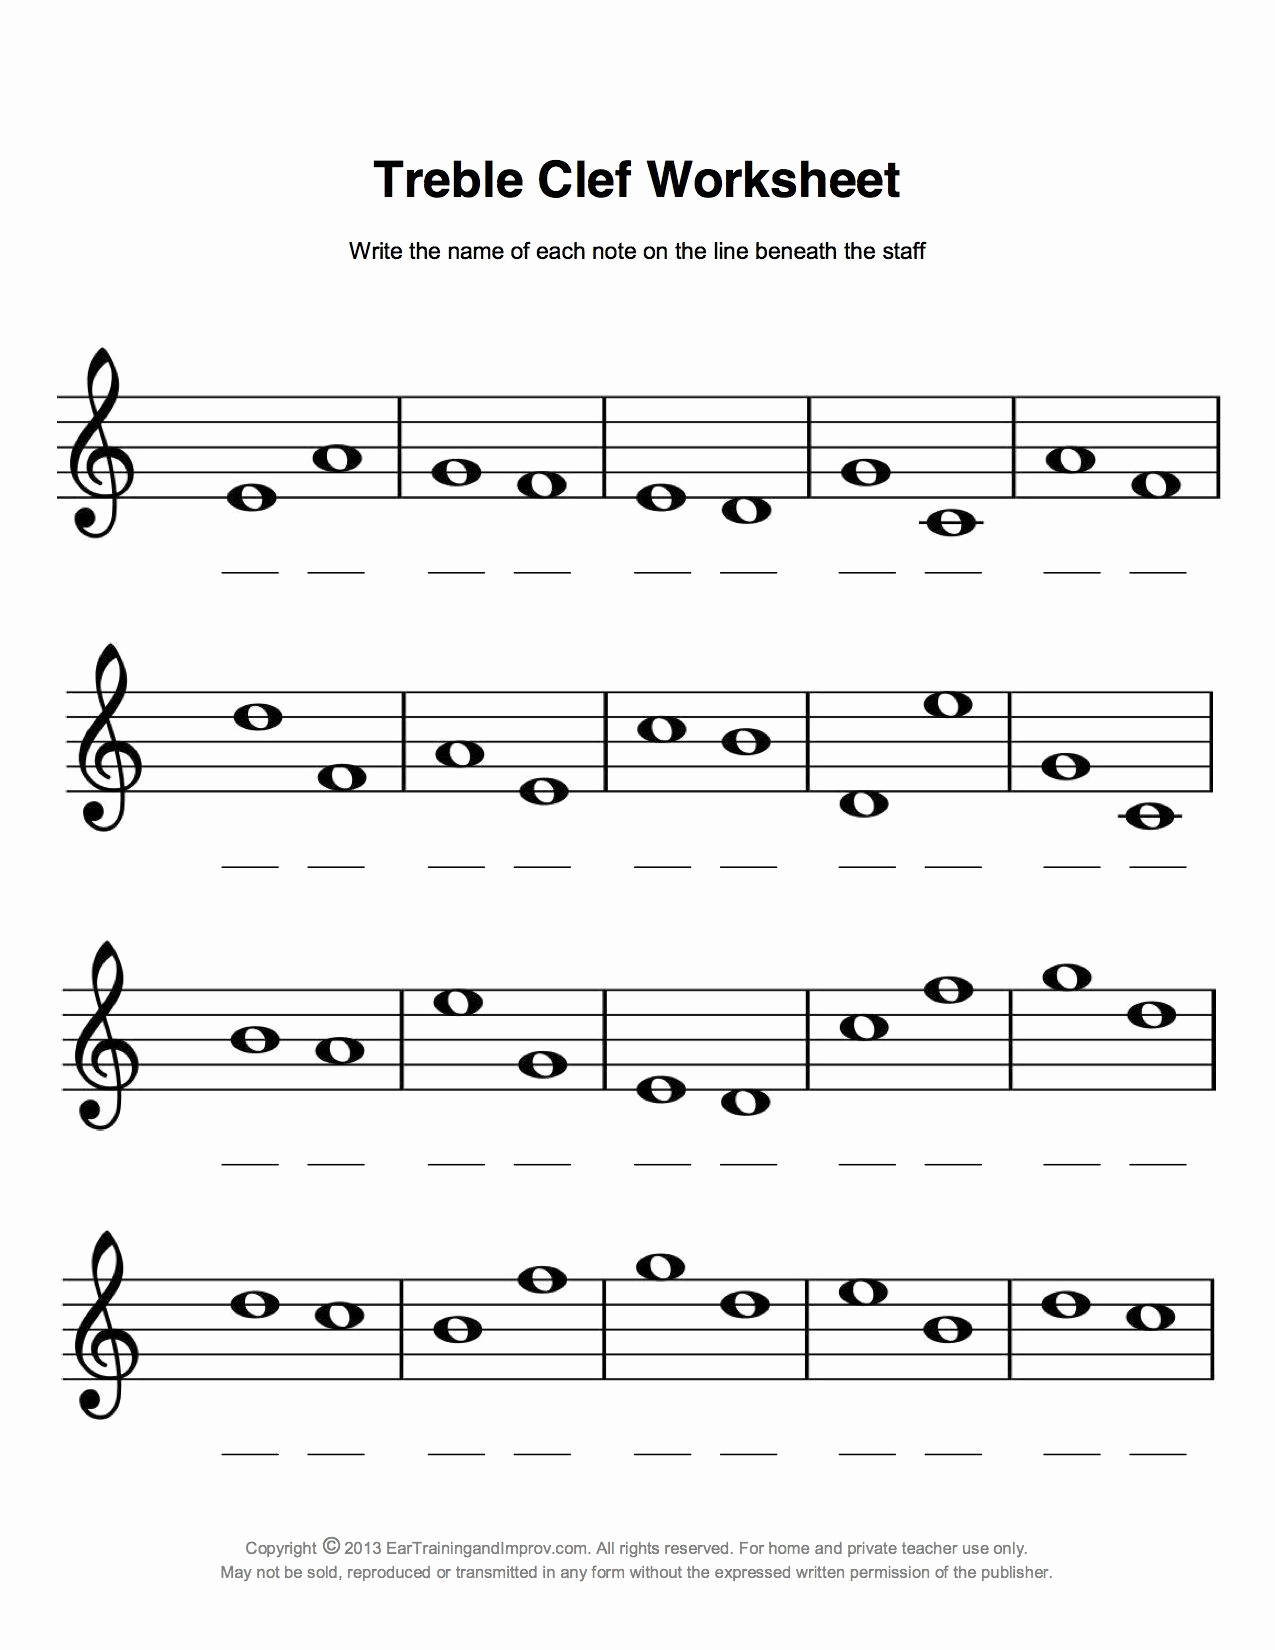 Music theory Worksheet for Kids New Music theory Worksheets for Beginners thekidsworksheet